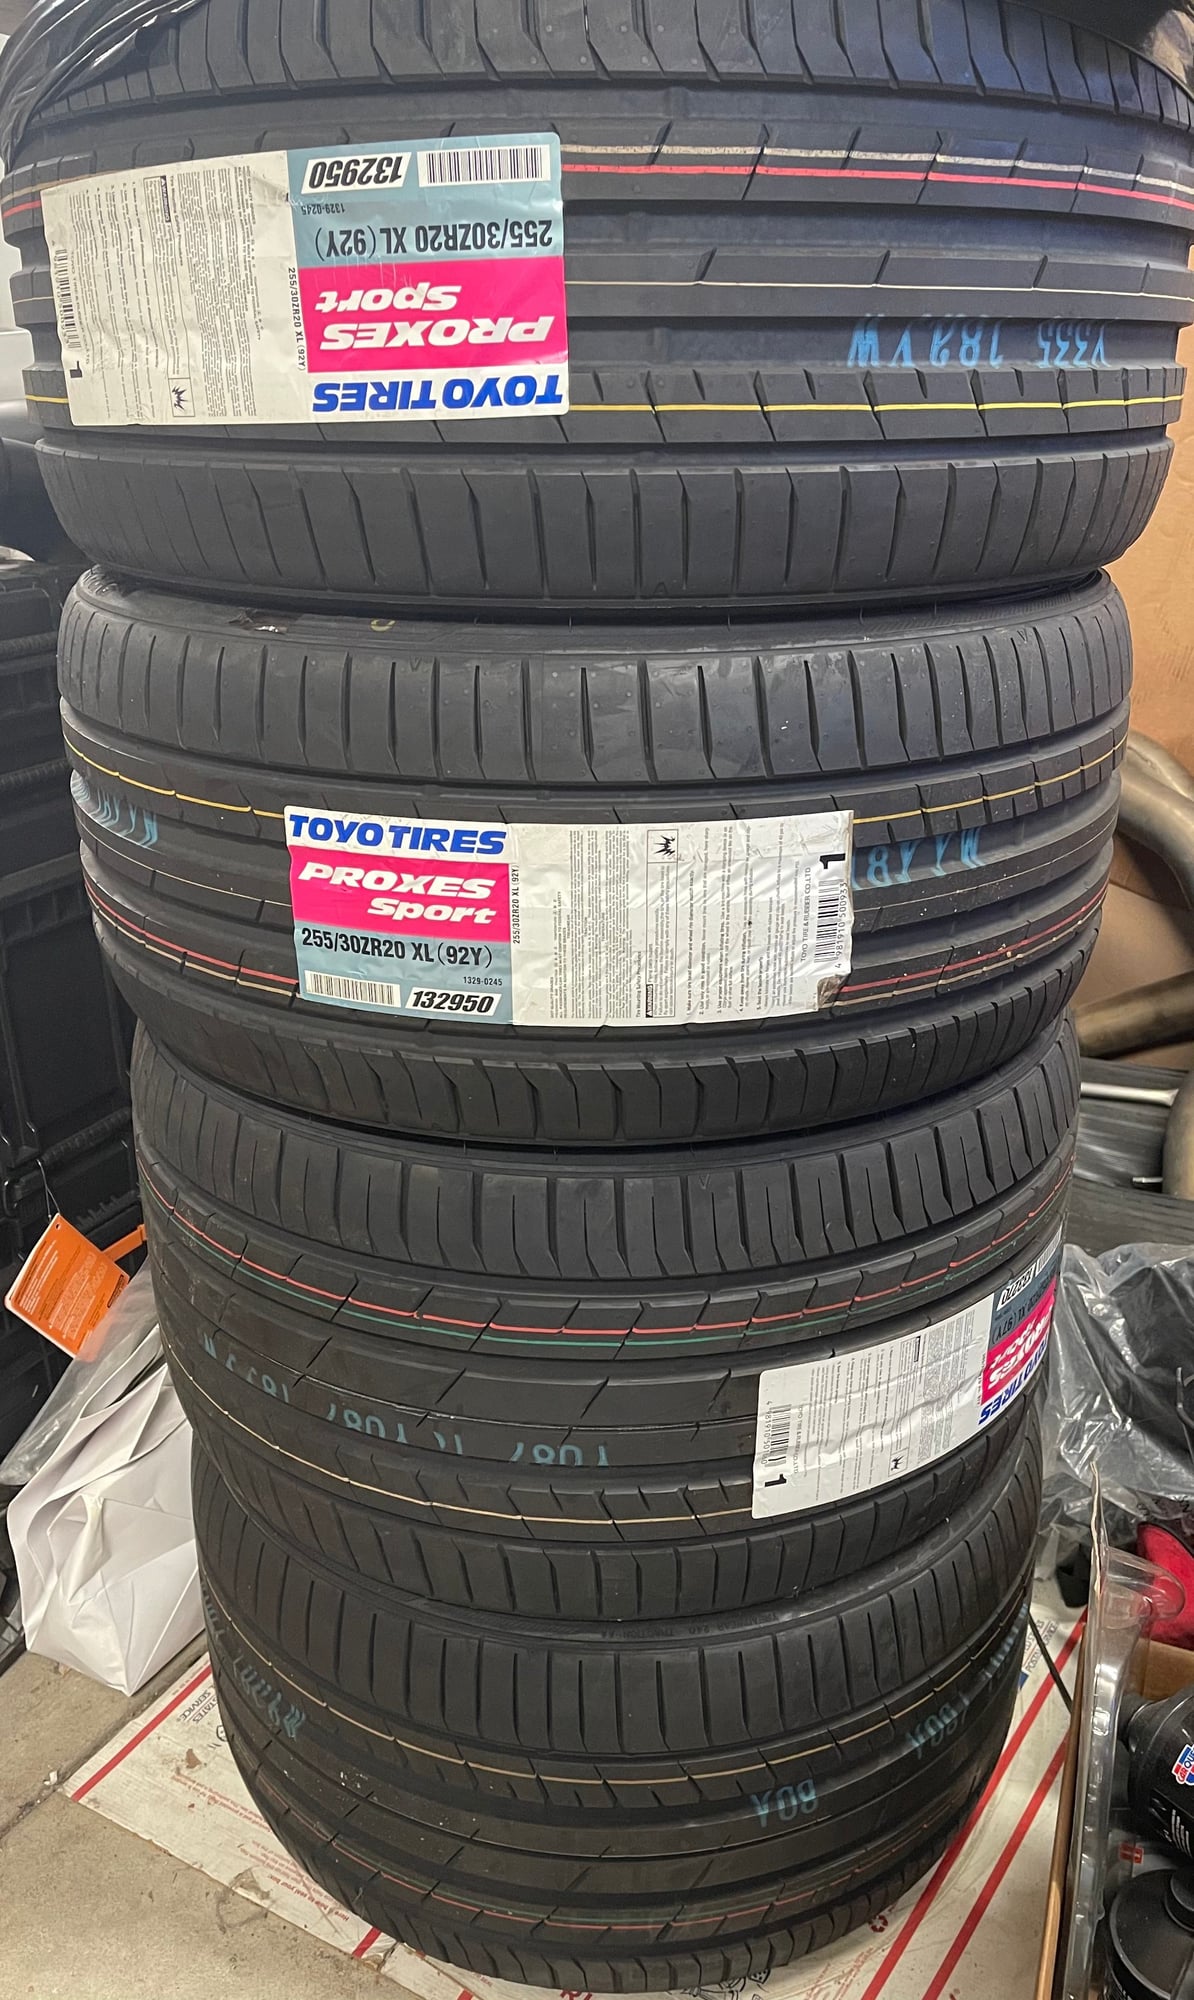 Wheels and Tires/Axles - Brand New Staggered Toyo Proxes Sport Tires 255/30r20, 305/25r20 - New - 0  All Models - San Jose, CA 95131, United States